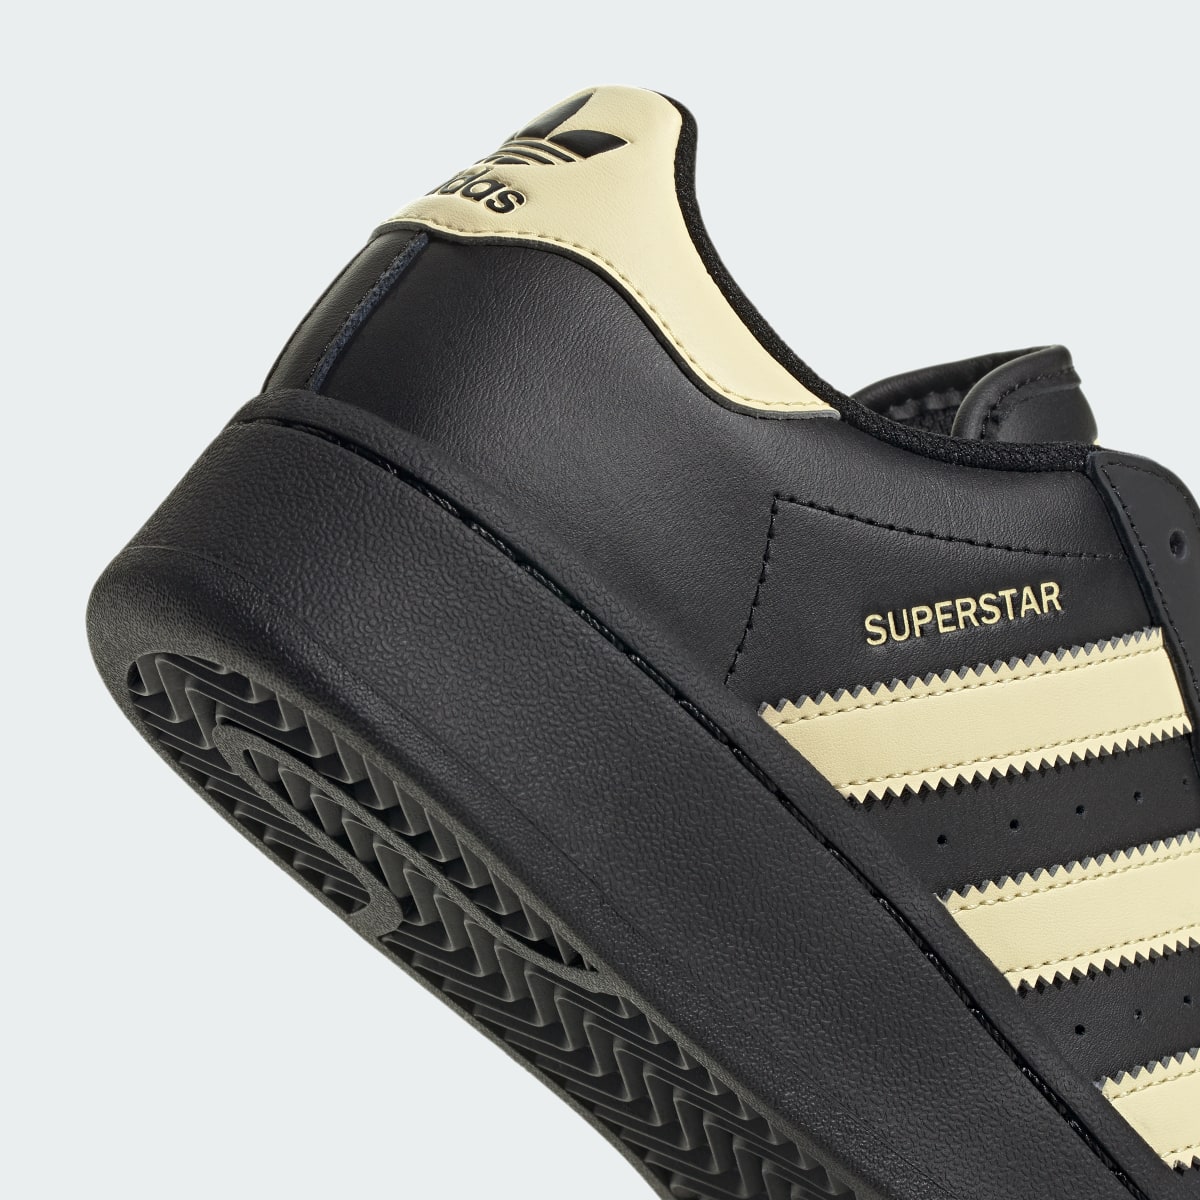 Adidas Superstar XLG Shoes. 9